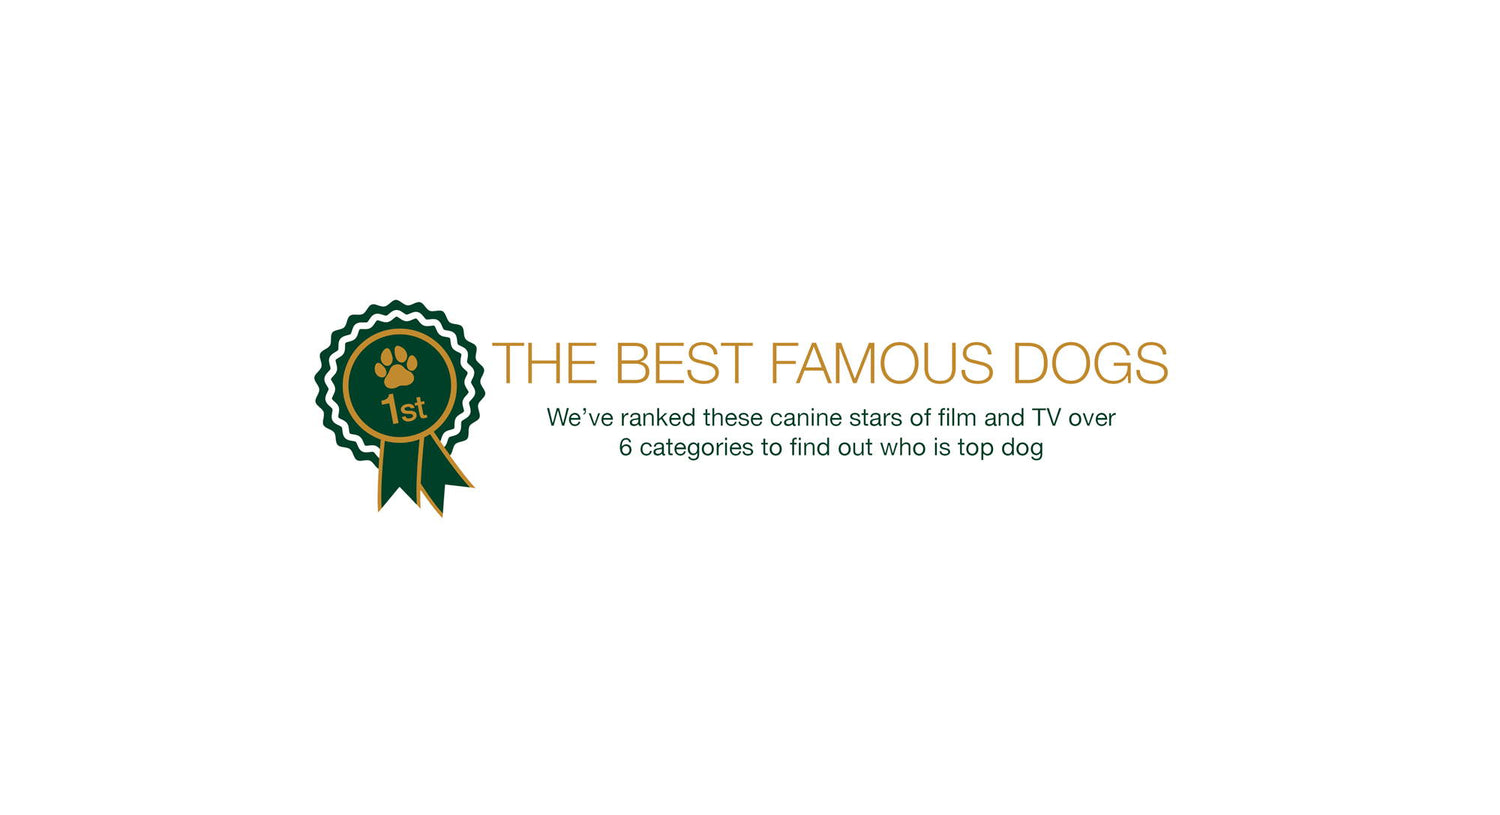 The Best Famous Dogs